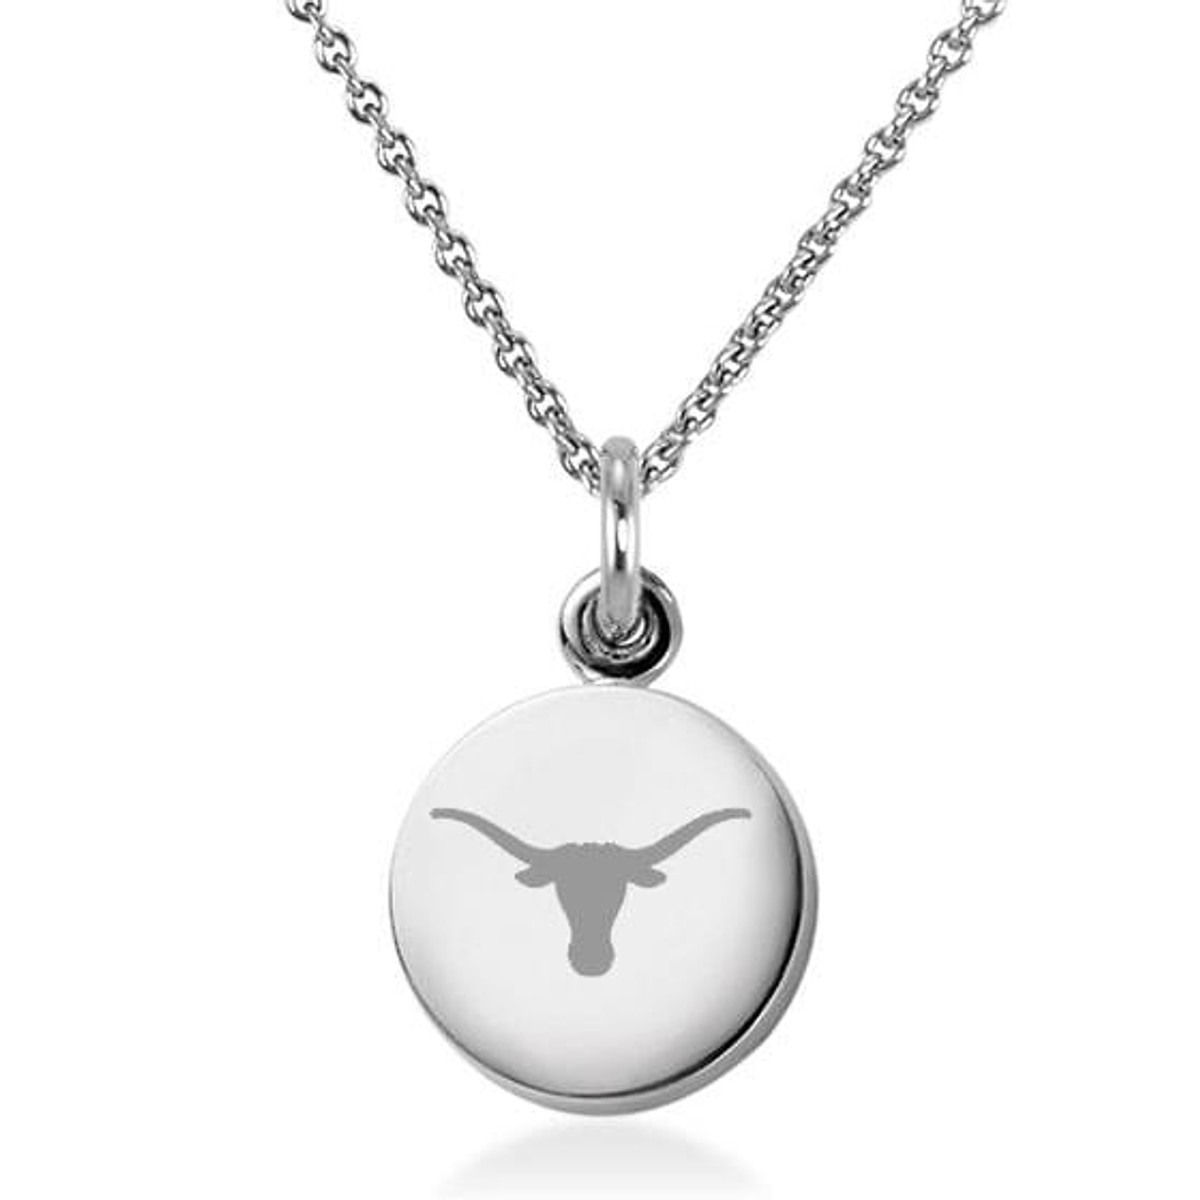 University of Texas Necklace with Charm in Sterling Silver - Graduation